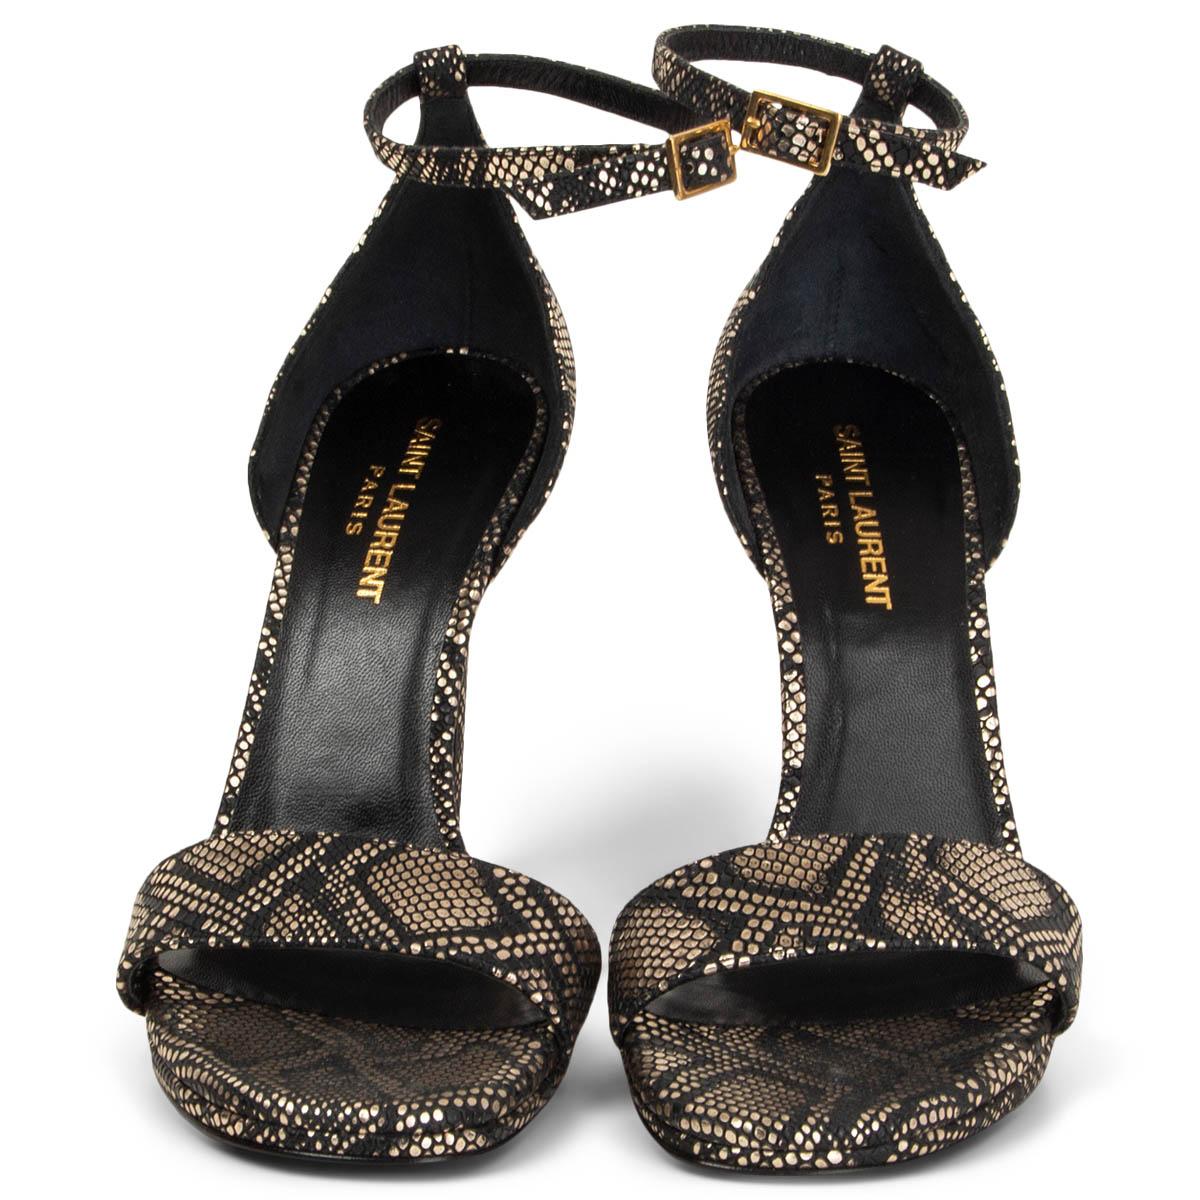 100% authentic Saint Laurent 'Python Disco Jane' ankle-strap sandals in metallic light gold-tone and black snakeskin embossed leather. Brand new. 

Measurements
Imprinted Size	38
Shoe Size	38
Inside Sole	25cm (9.8in)
Width	8cm (3.1in)
Heel	11.5cm